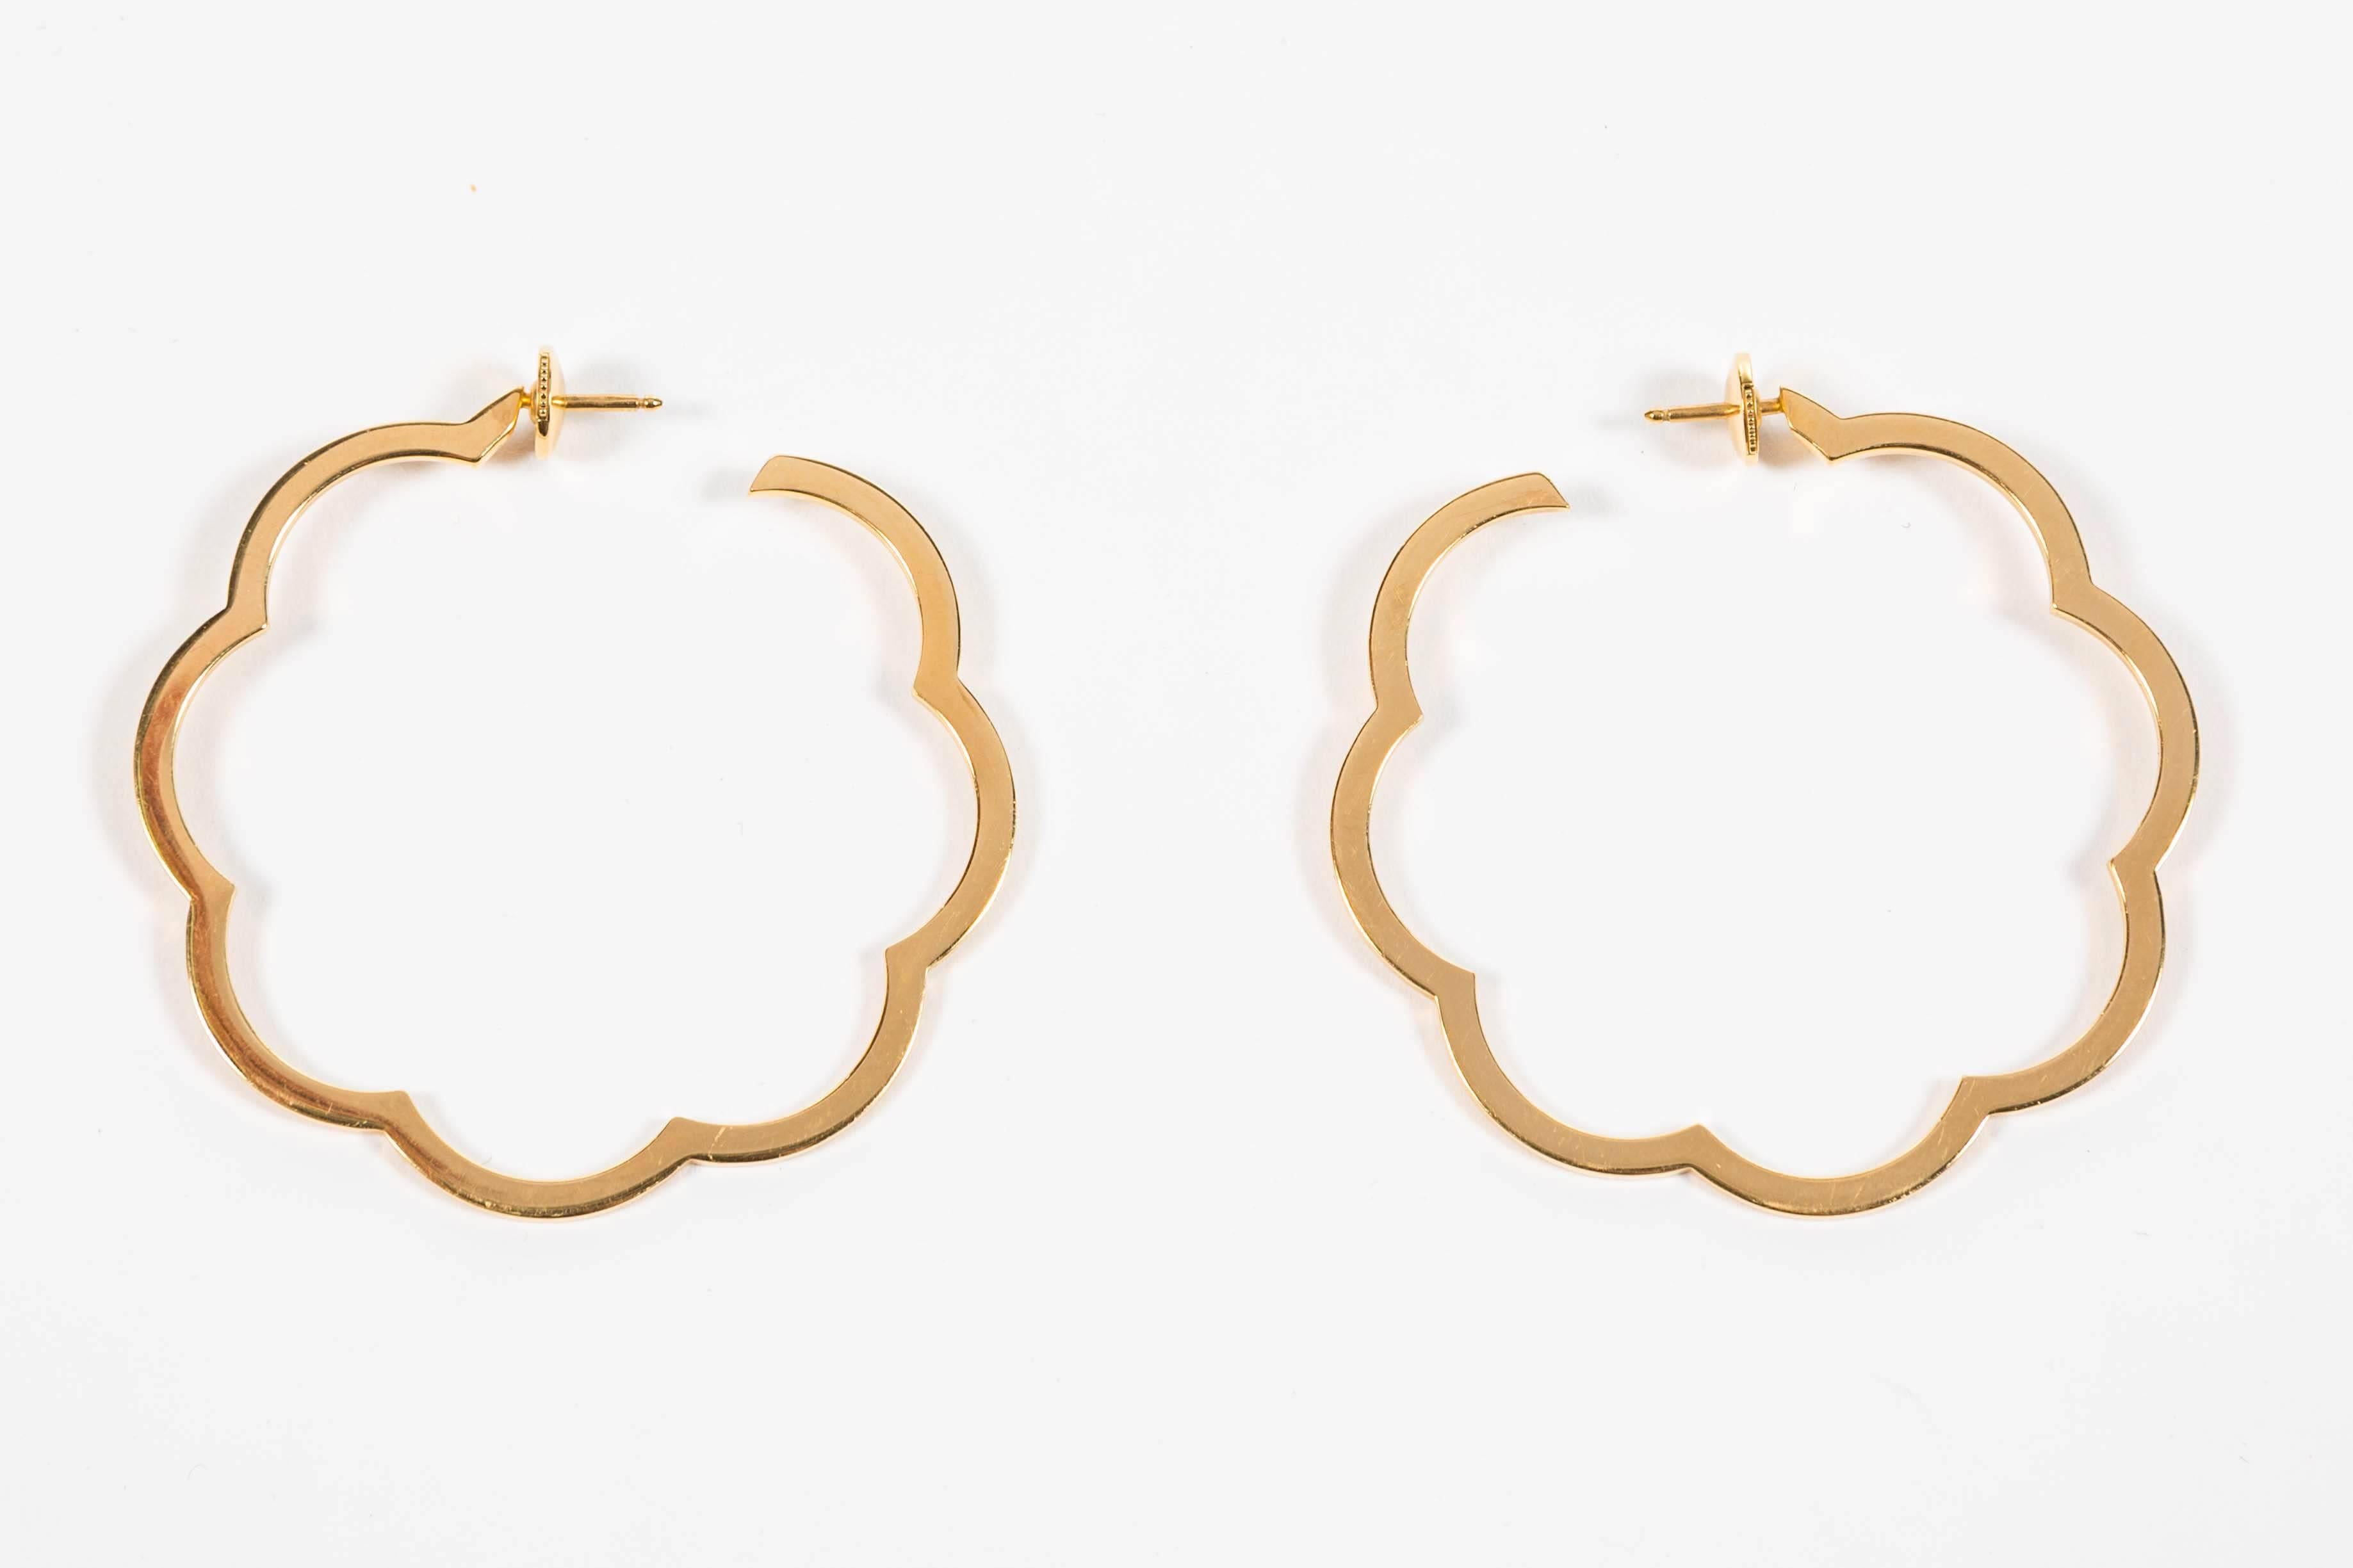 A pair of Chanel 'Camellia' hoop earrings in polished 18-karat yellow gold. Signed Chanel. Approx 2 mm thick.